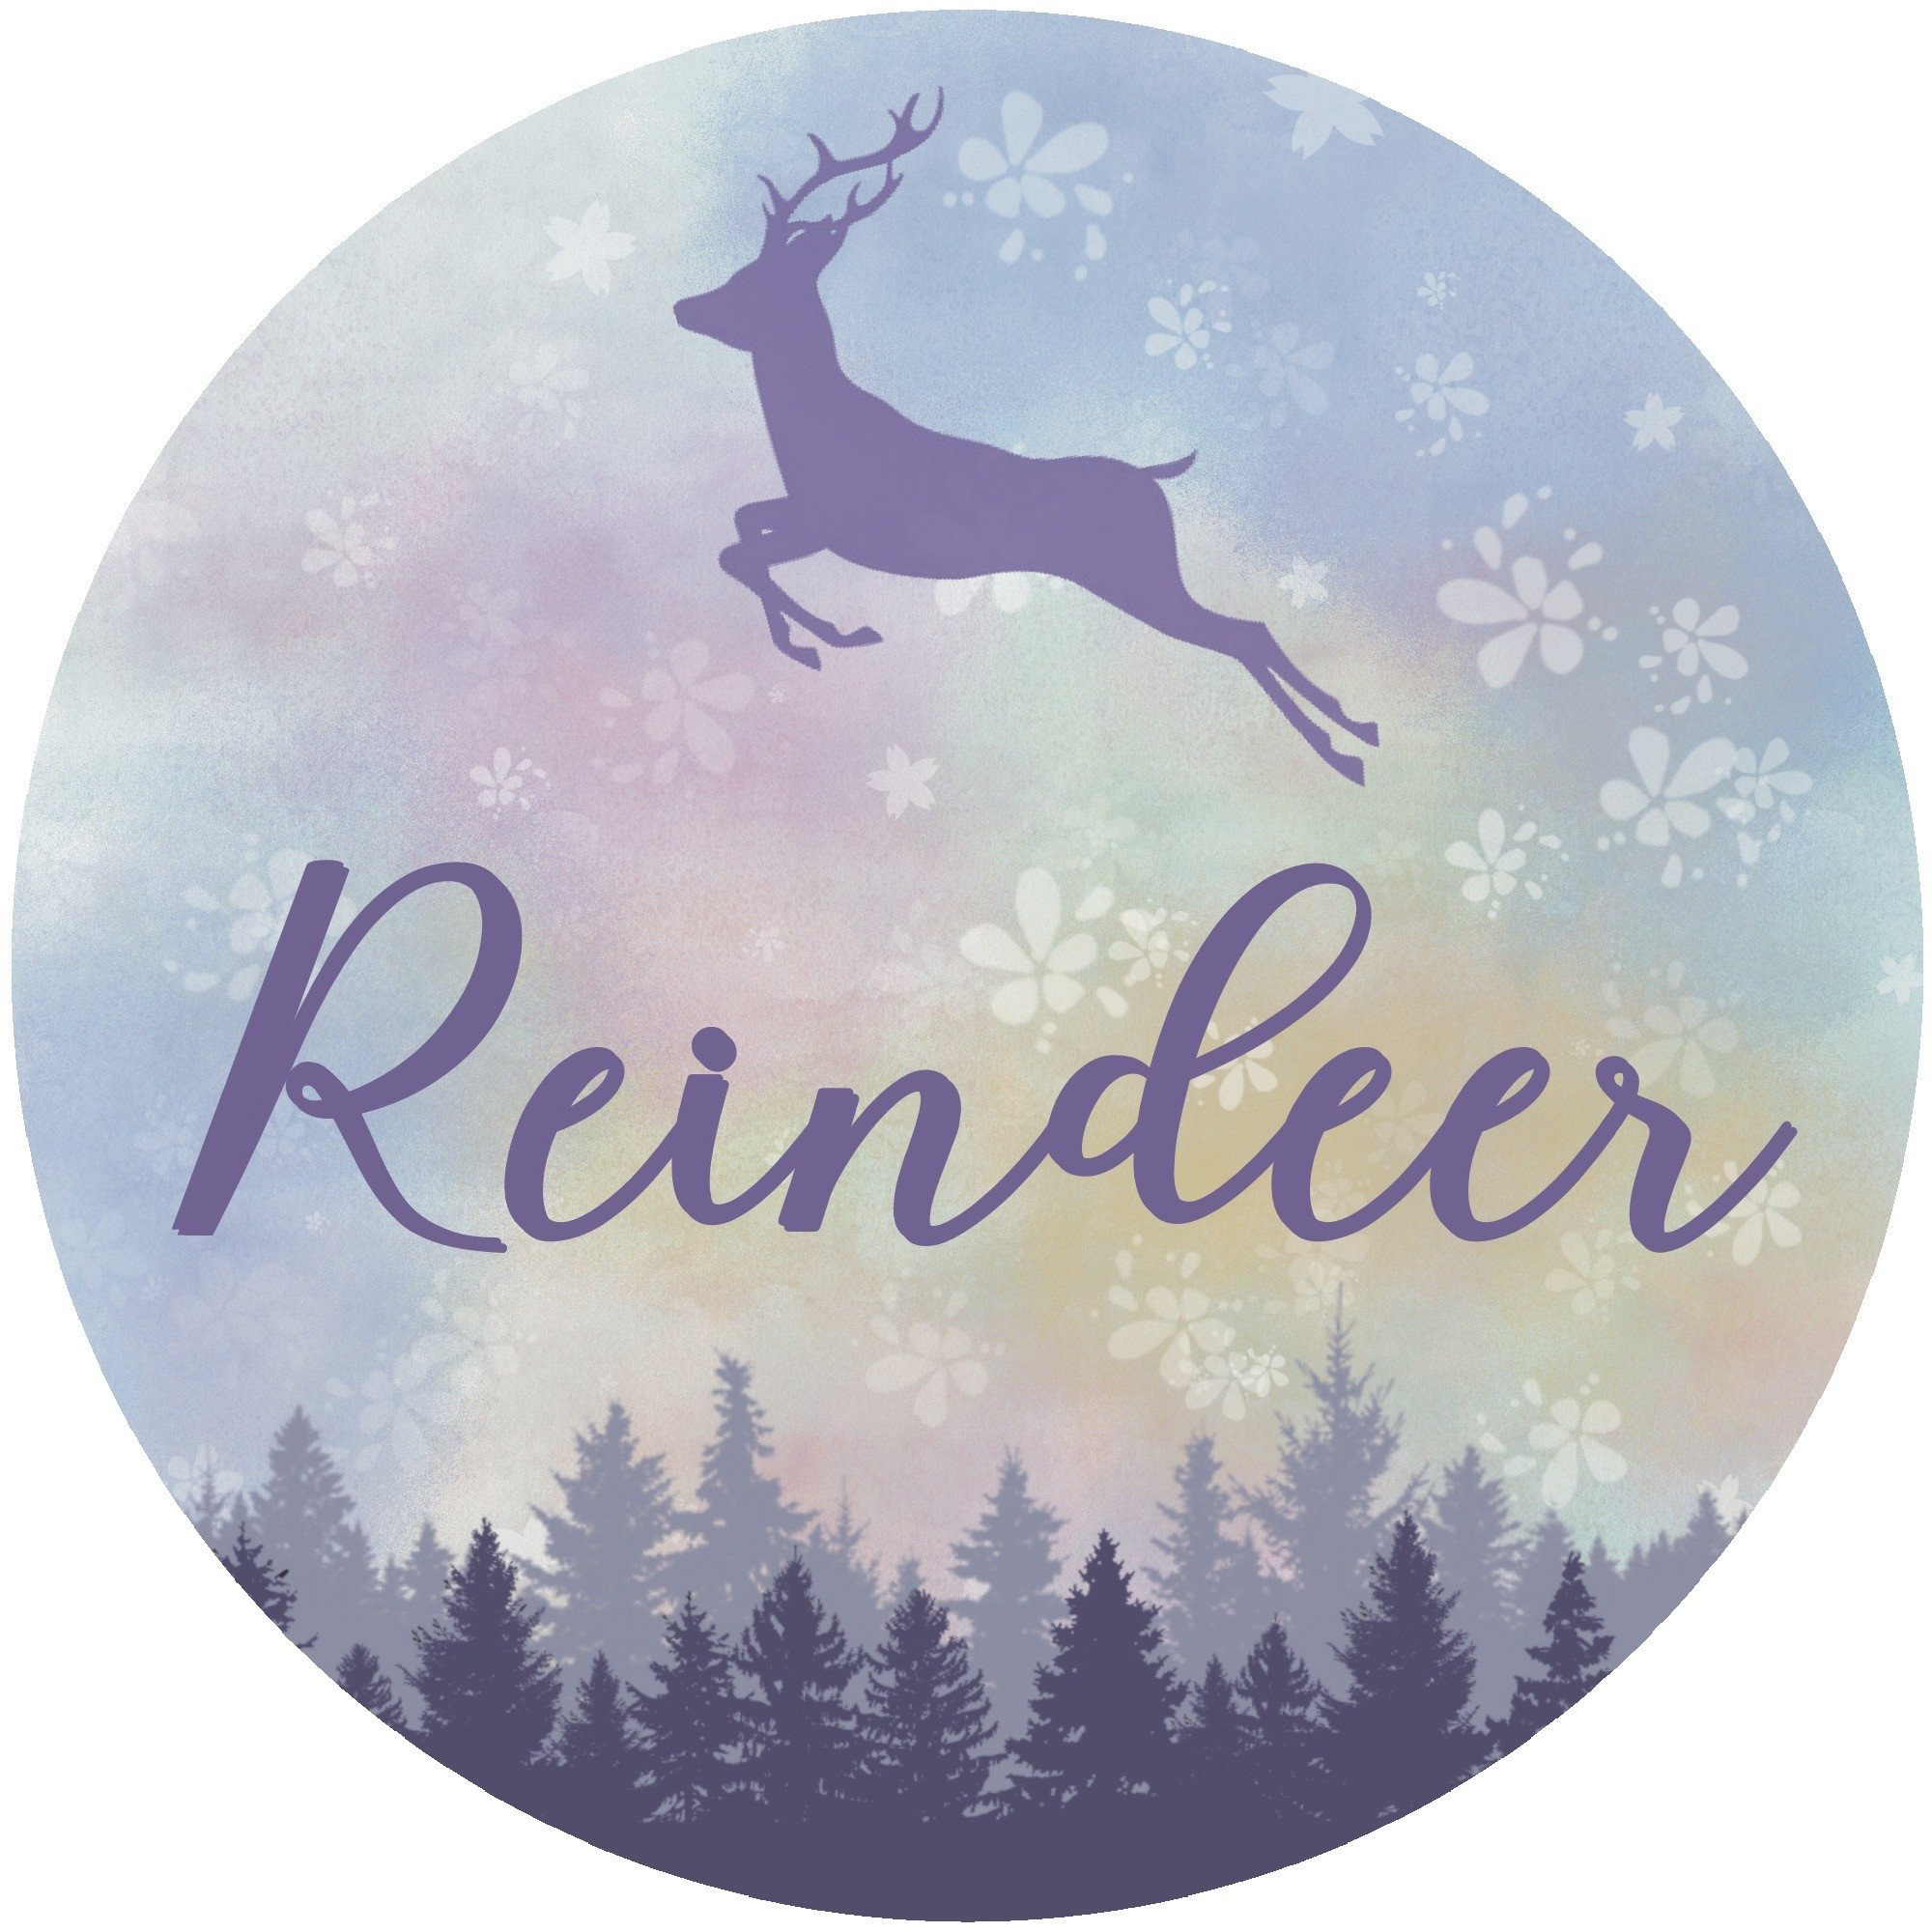 REINDEER's profile picture